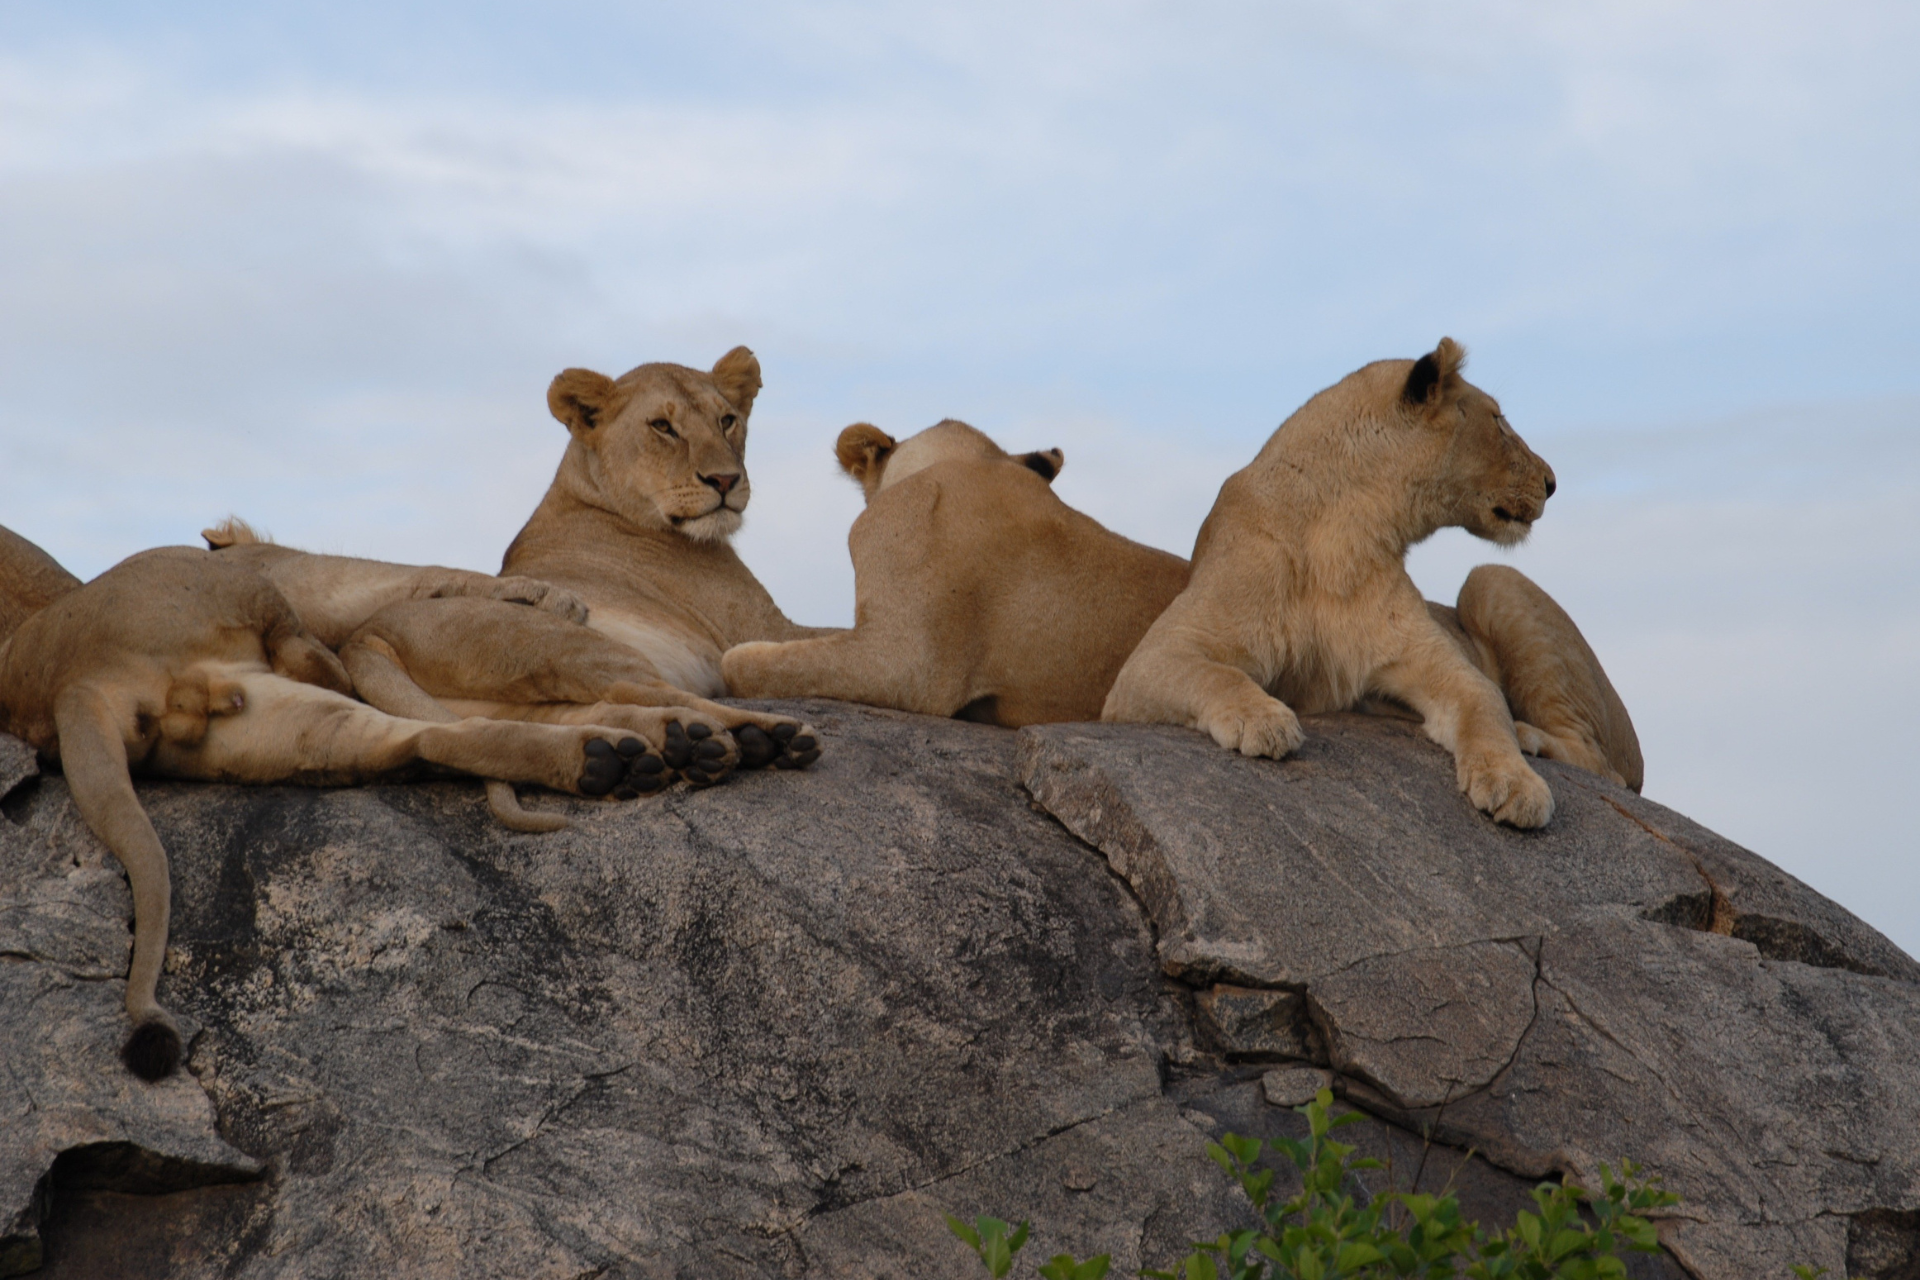 Lions on Rocks in the Serengeti